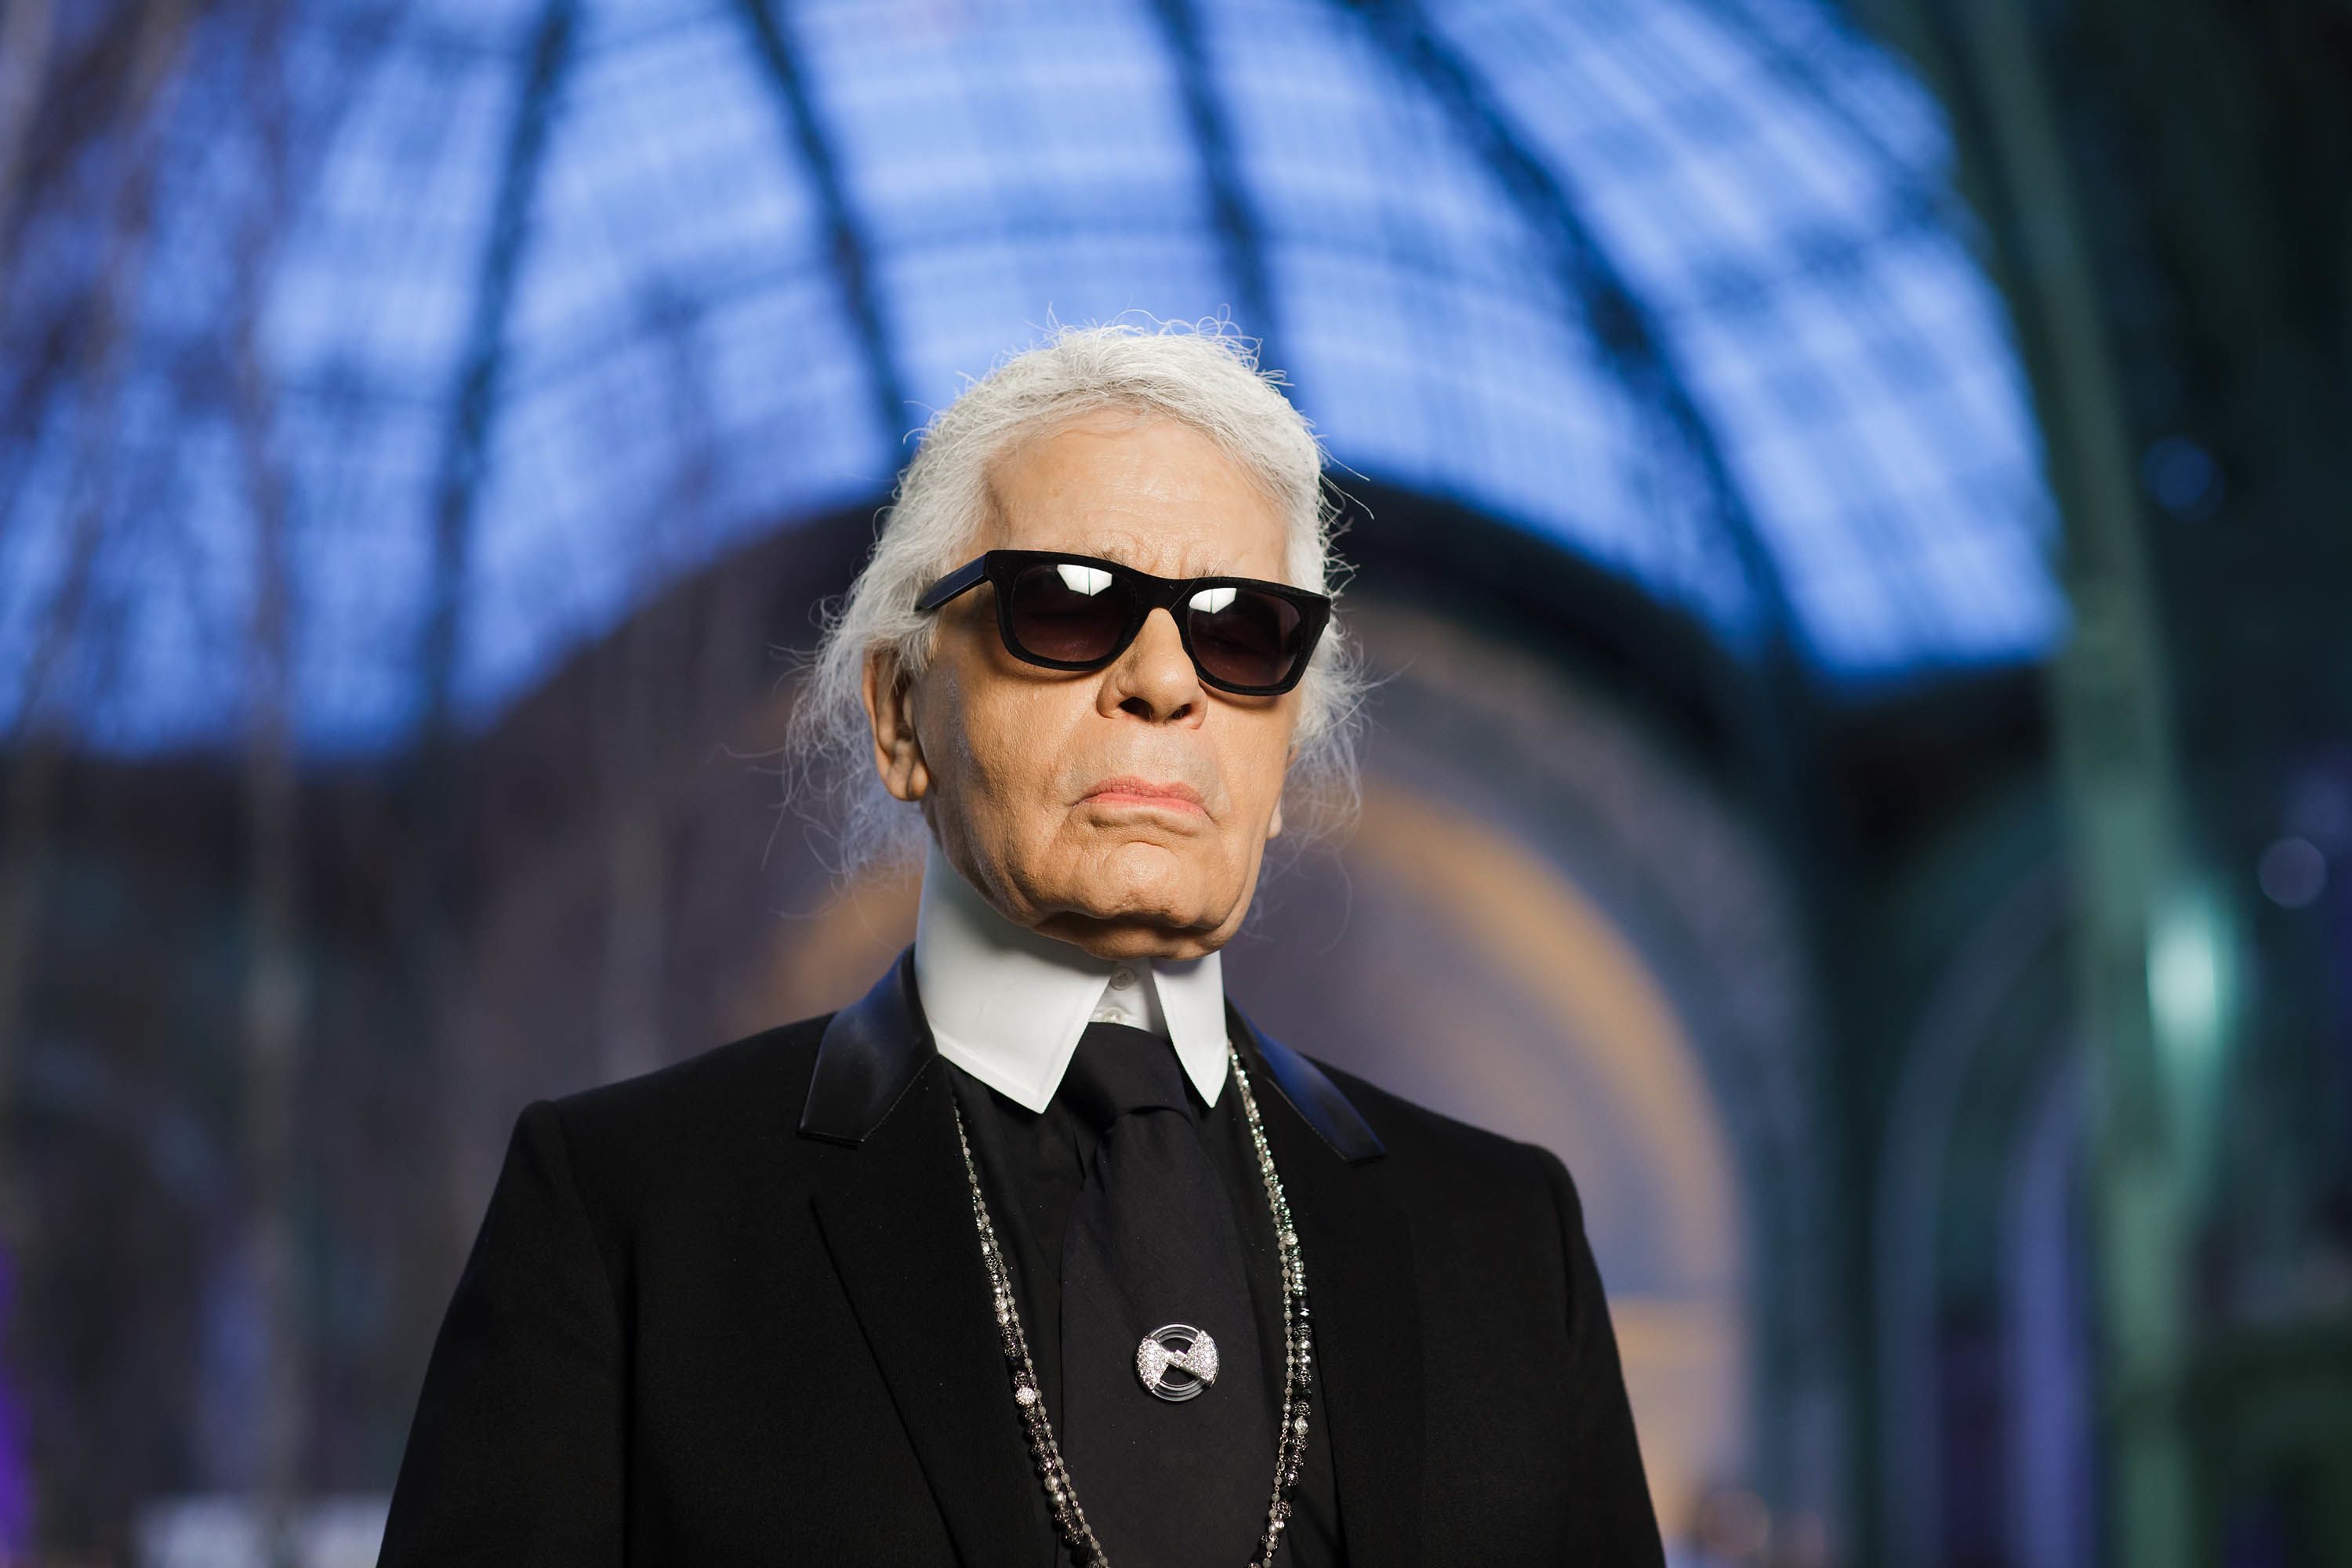 Karl Lagerfeld is set to launch his own fashion collection